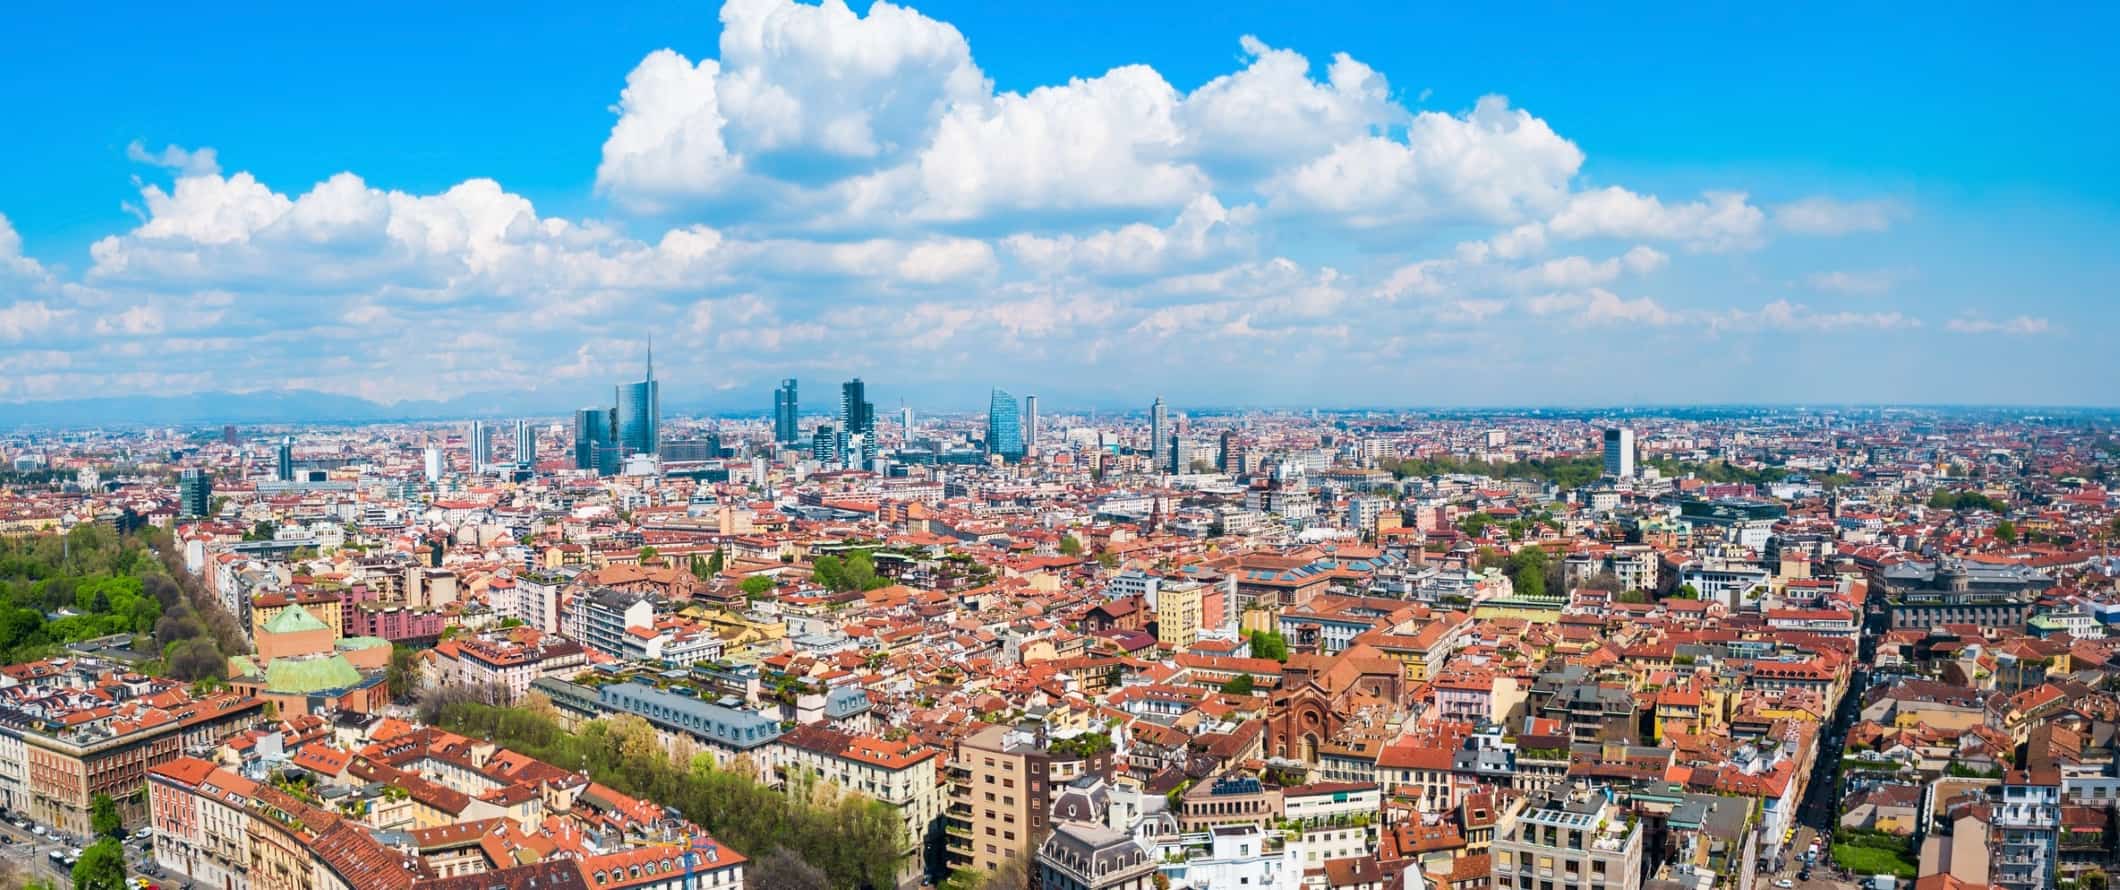 The gorgeous and sprawling city skyline of Milan, Italy on a sunny day with mountains in the background